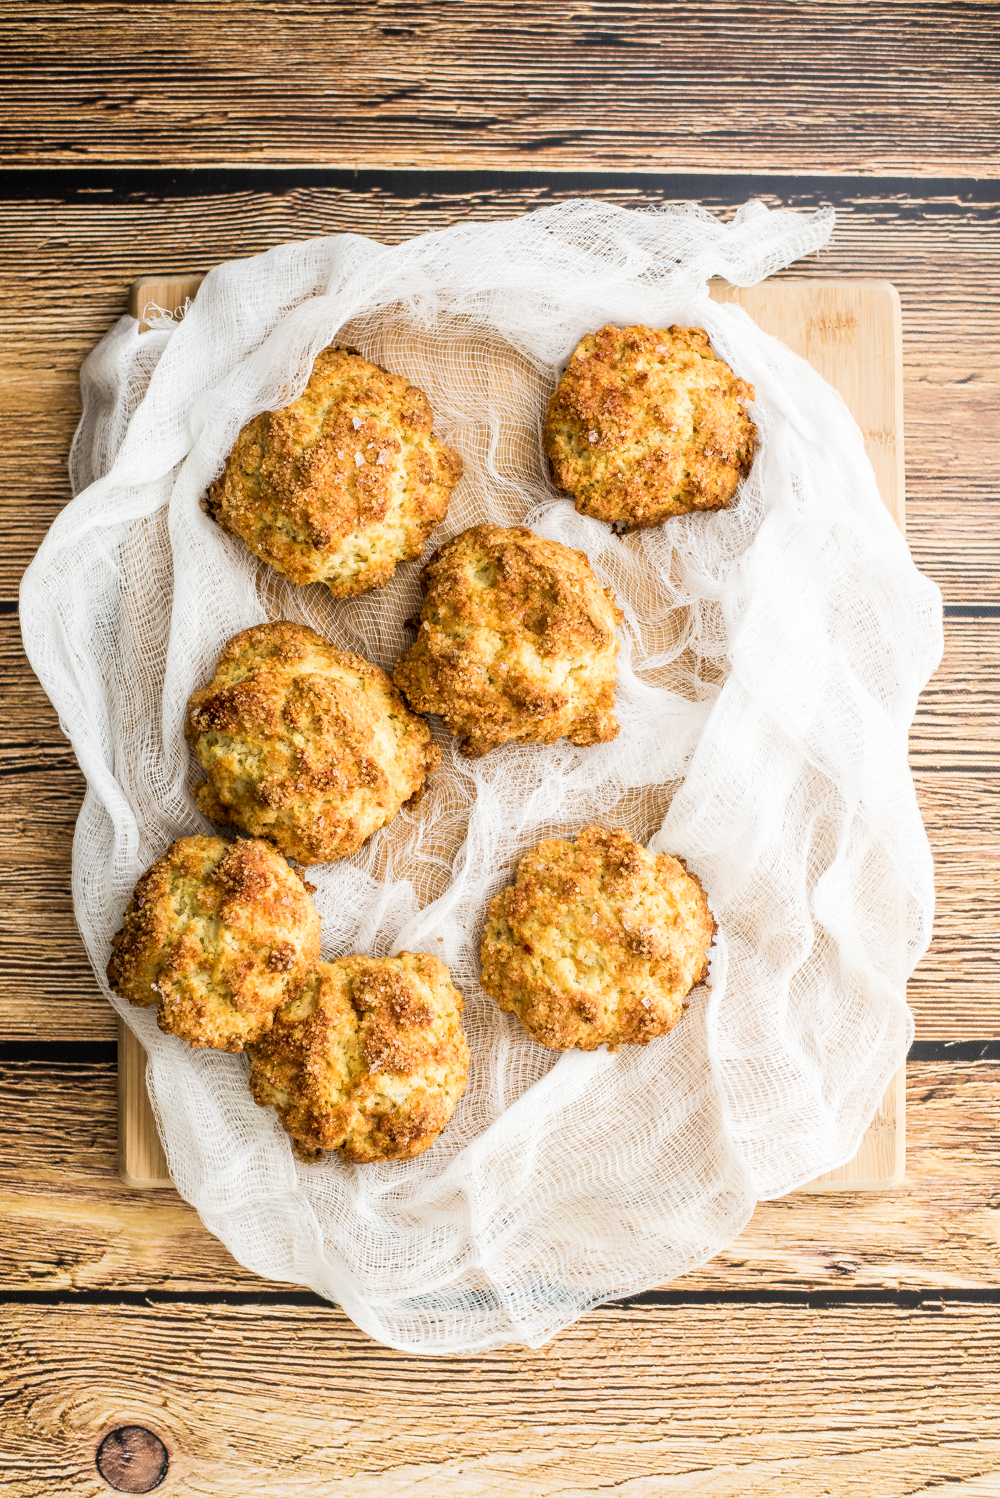 Apple cheddar scones are the perfect example of a sweet and savory colliding into one. They are the perfect breakfast bites!